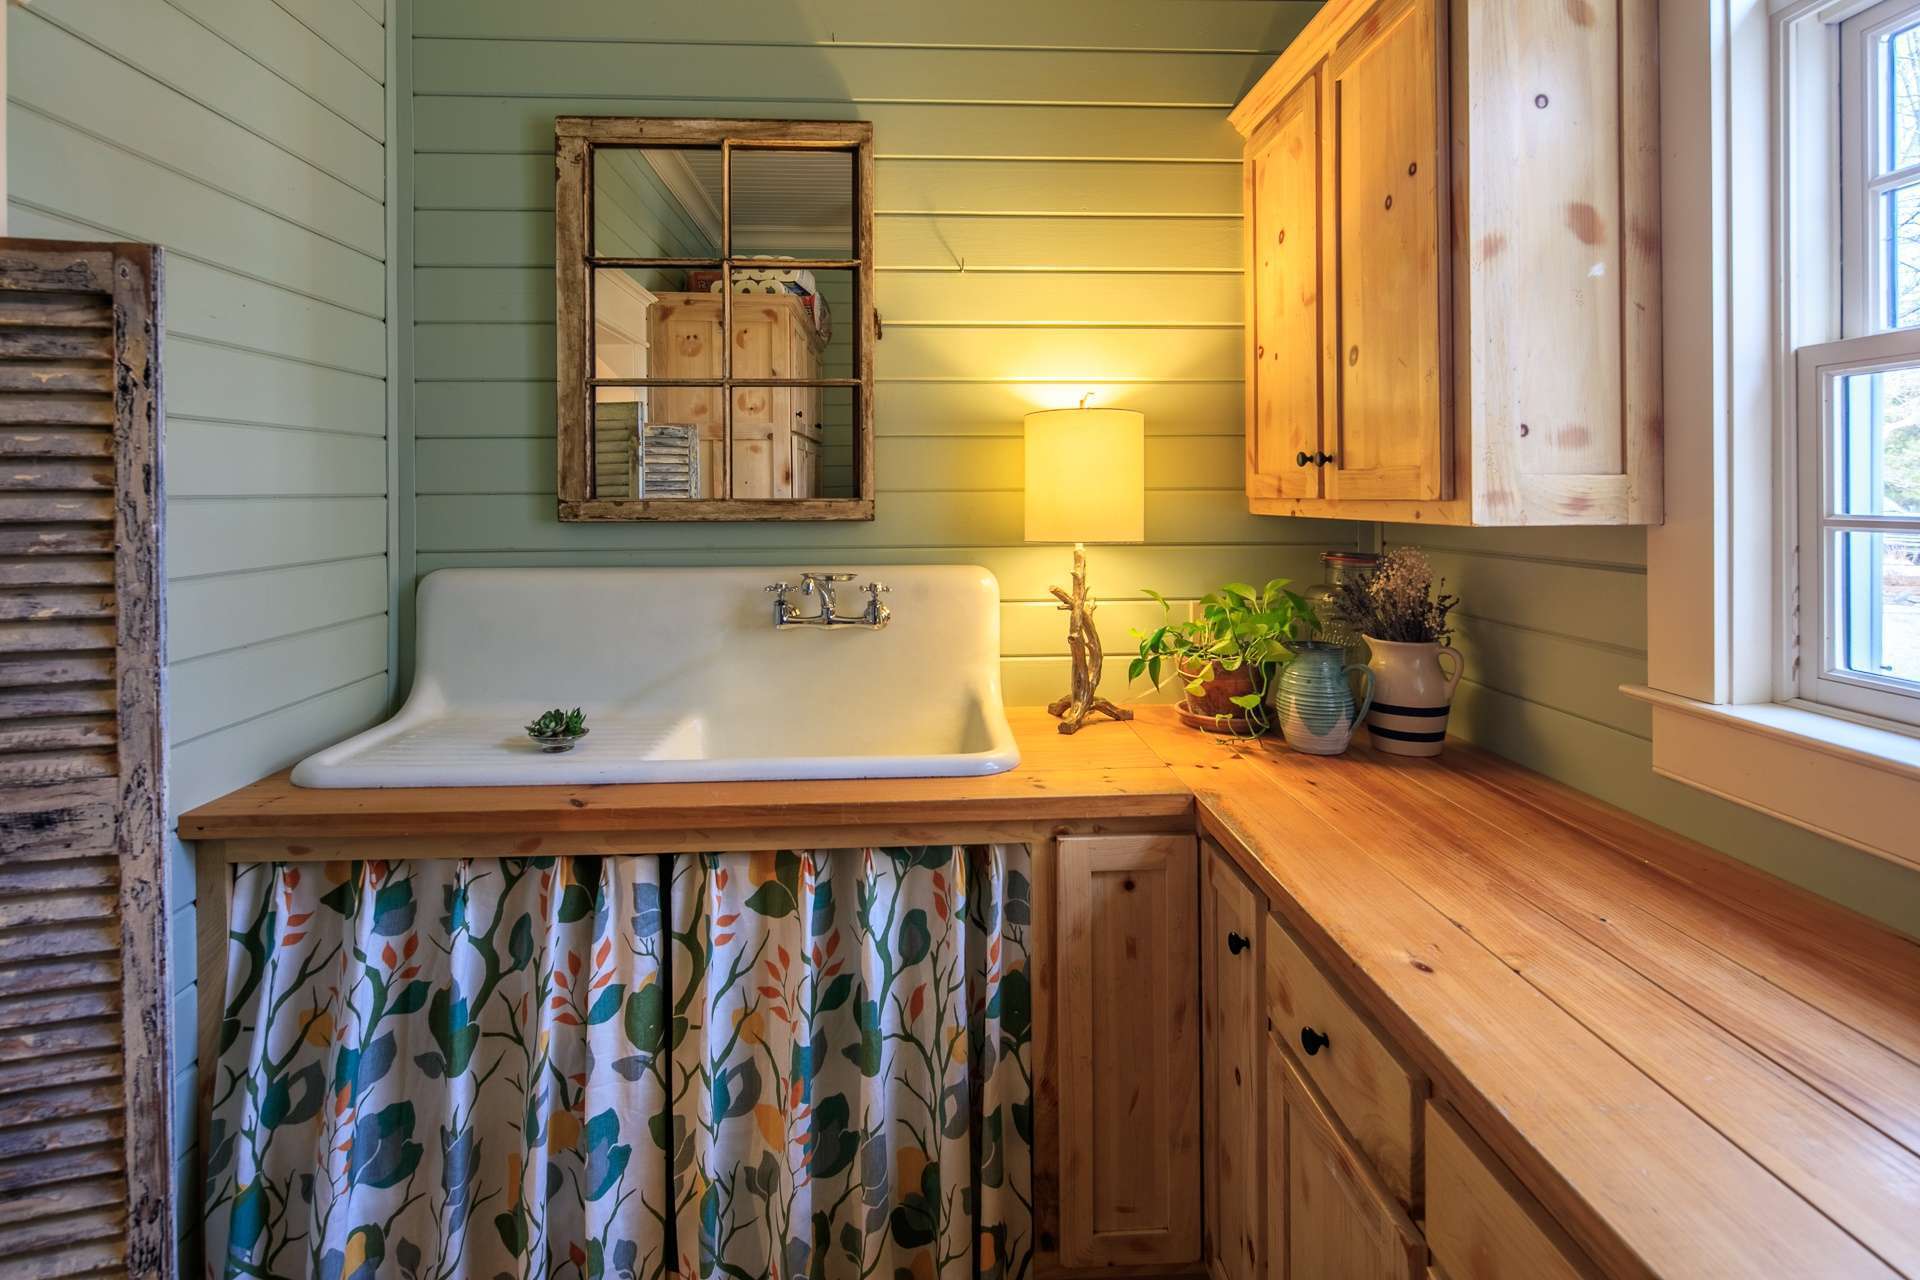 In keeping with the farmhouse styling, the laundry room features a farmhouse sink and custom cabinetry.